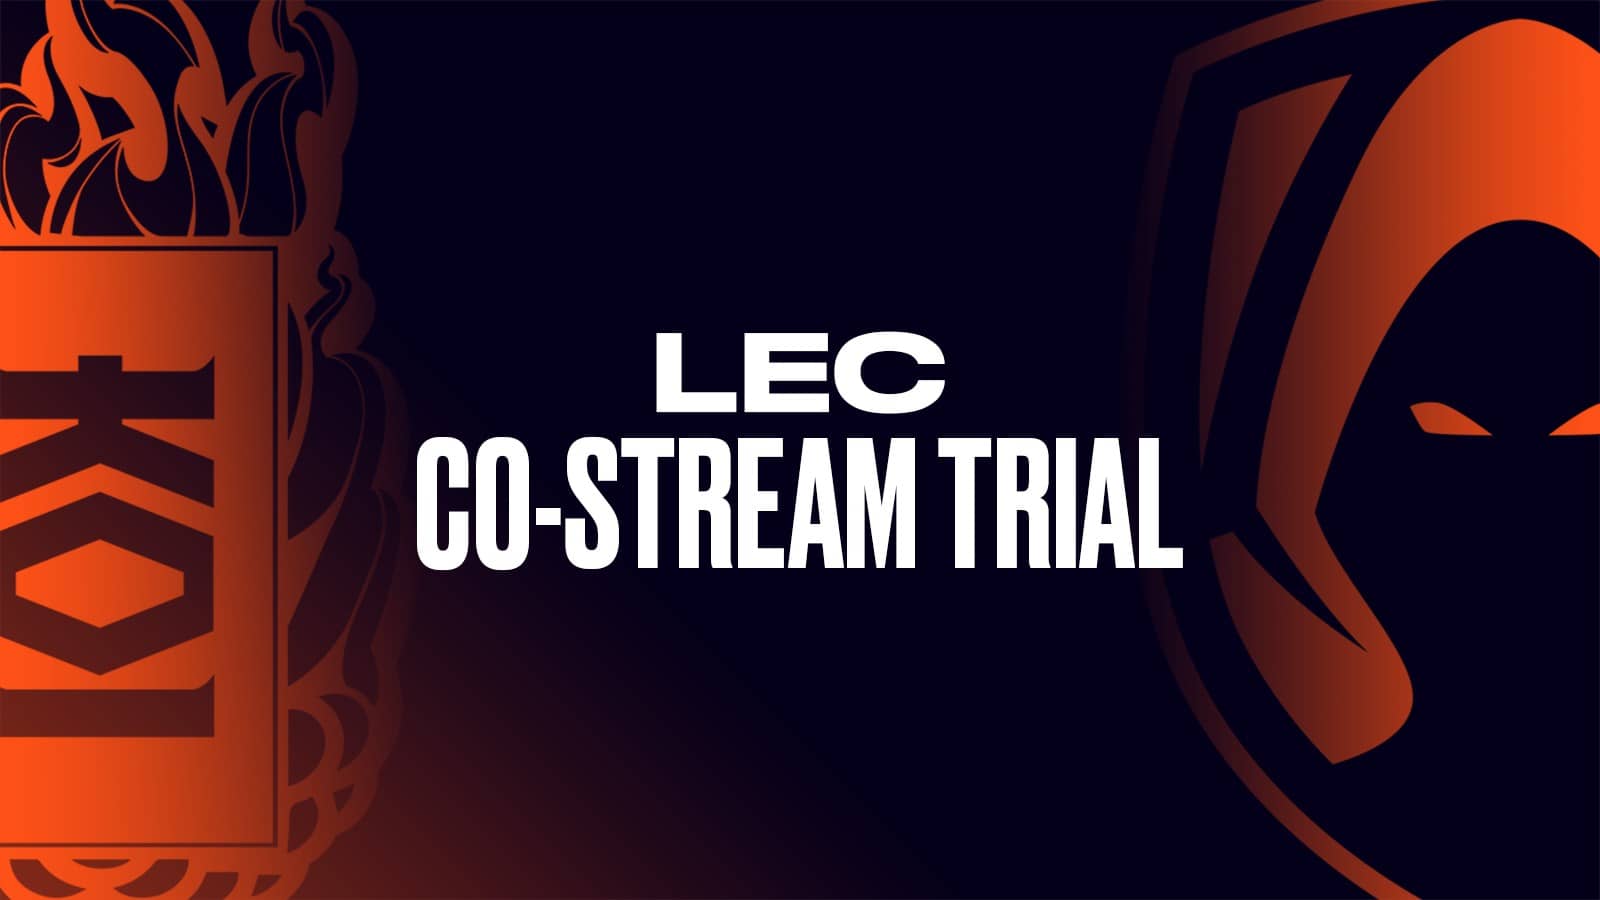 co-streaming LEC